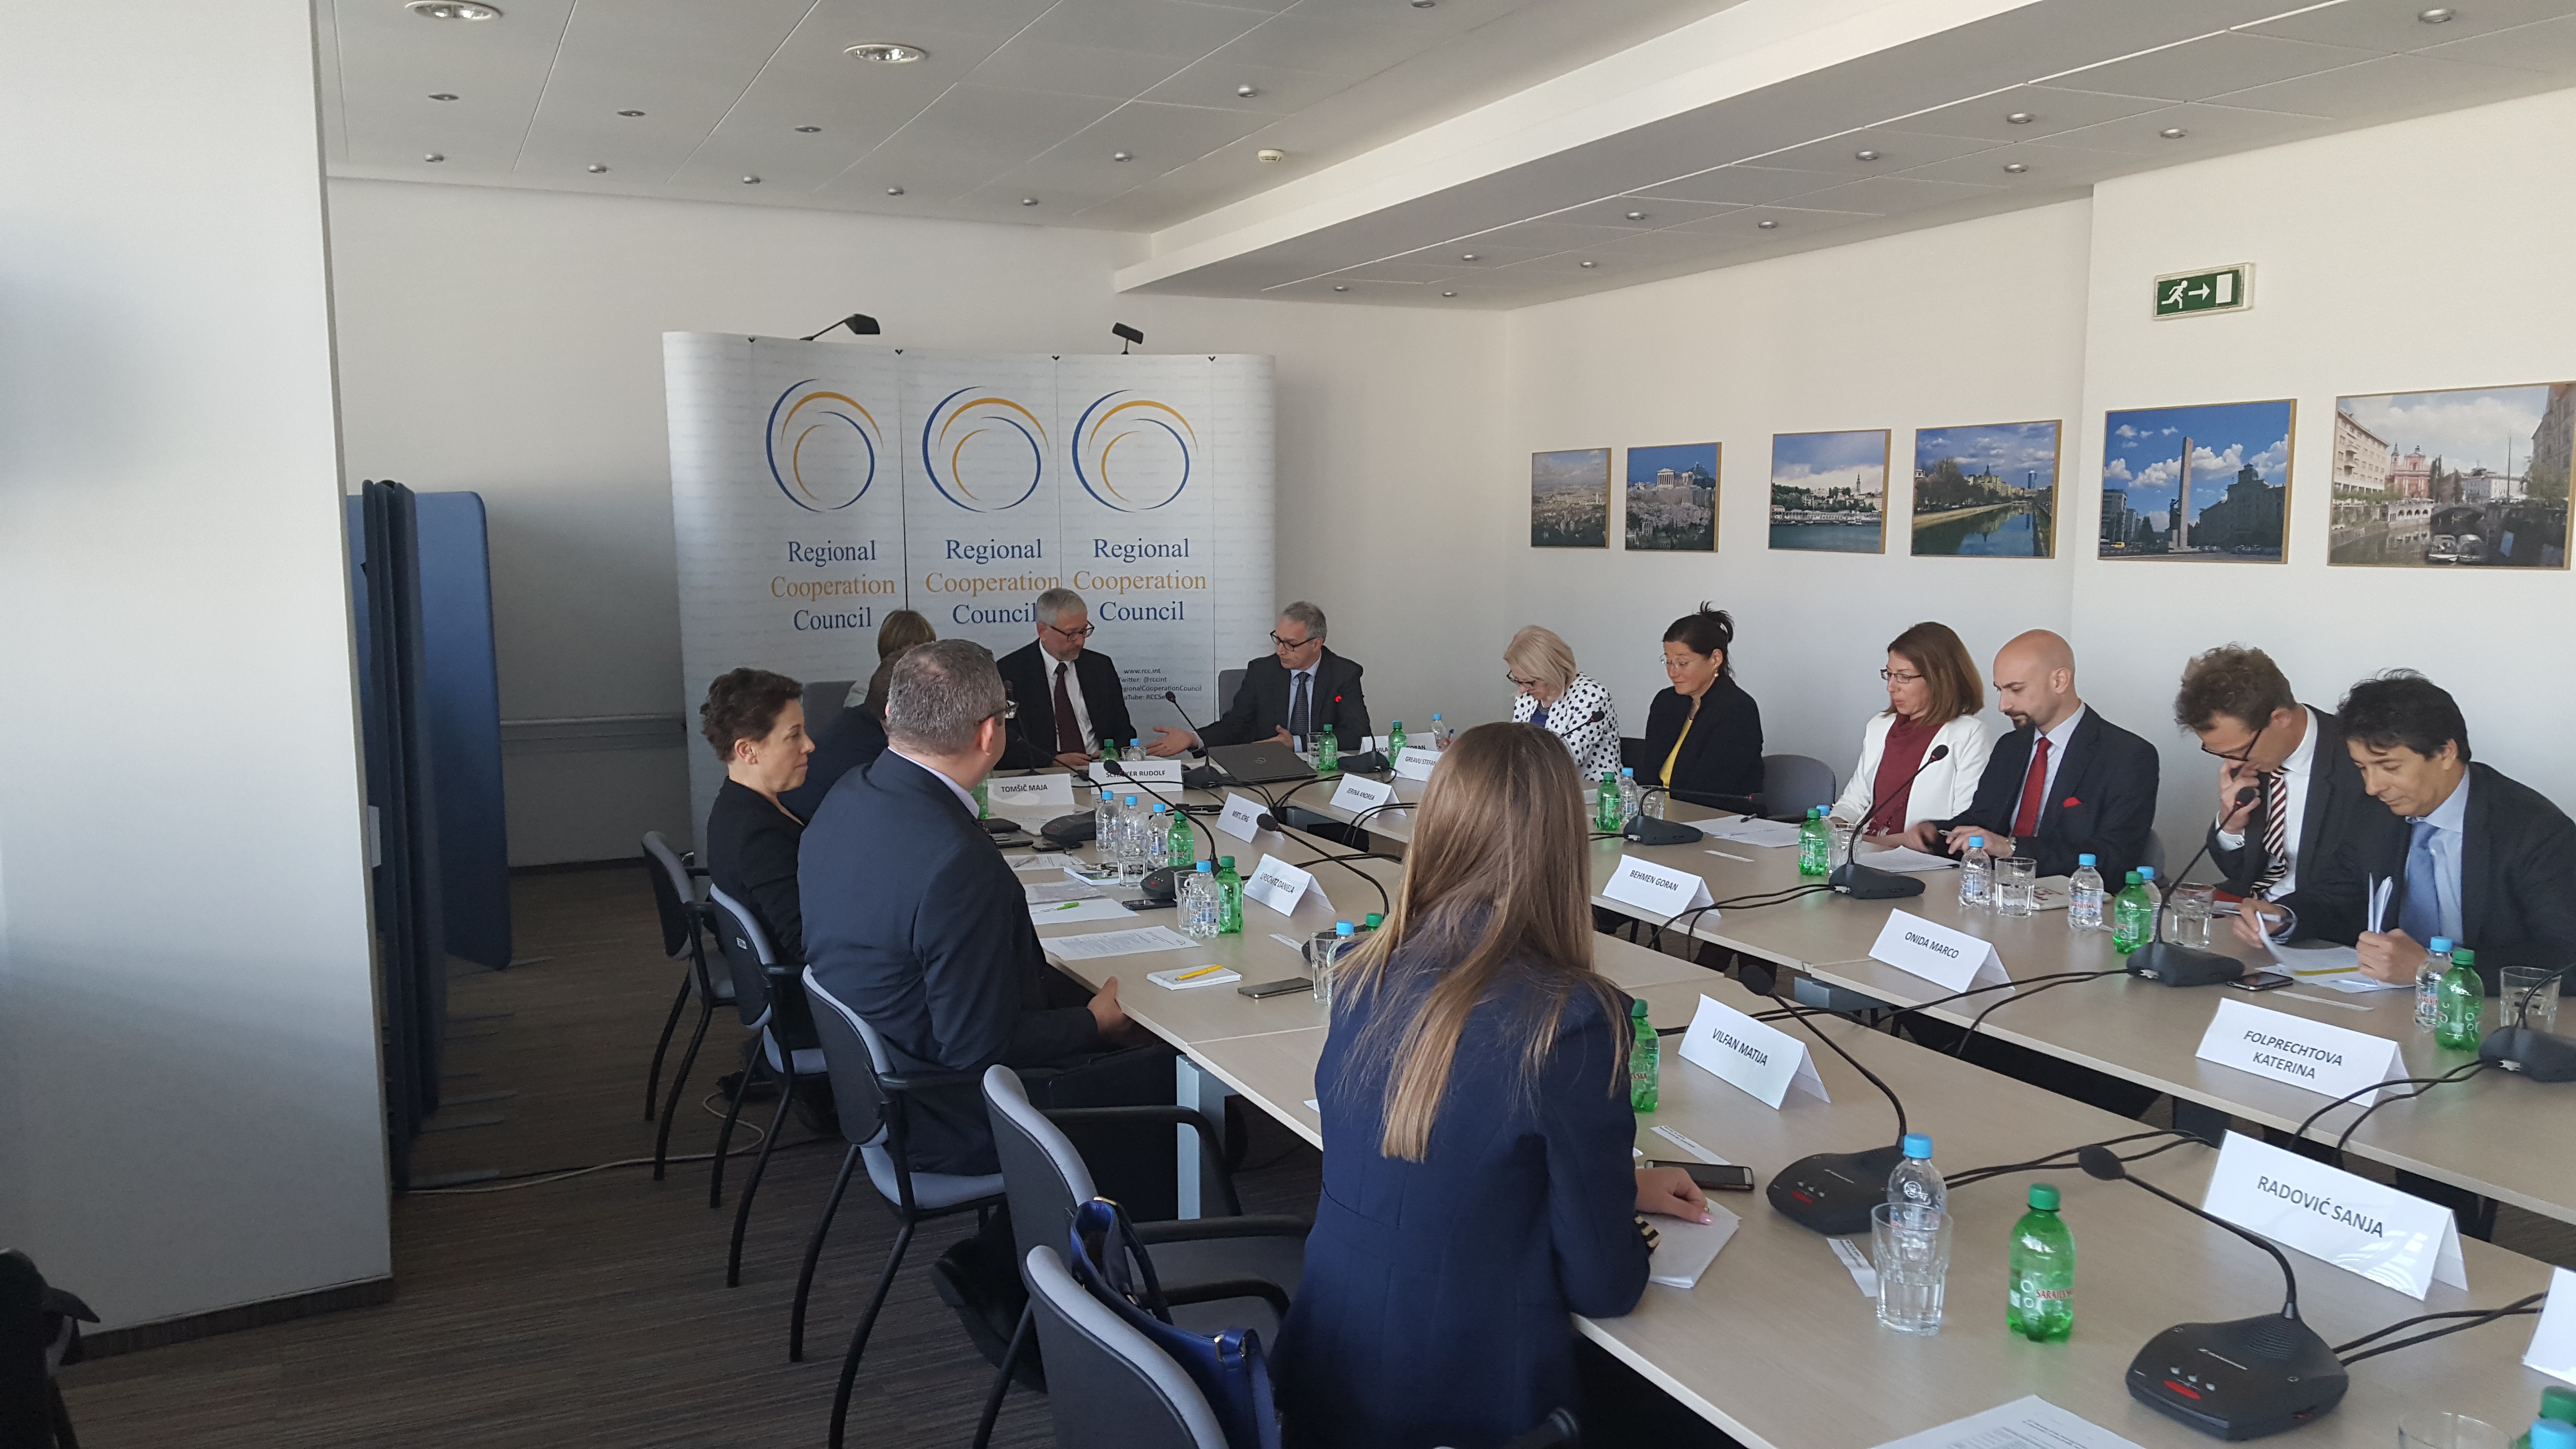 RCC hosted the first part of a two-day meeting of the Steering Group of Priority Area 10 (PA10) of the EU Strategy for the Danube Region (EUSDR), on 14 April 2016 in Sarajevo, BiH. (Photo: RCC/Selma Ahatovic-Lihic)